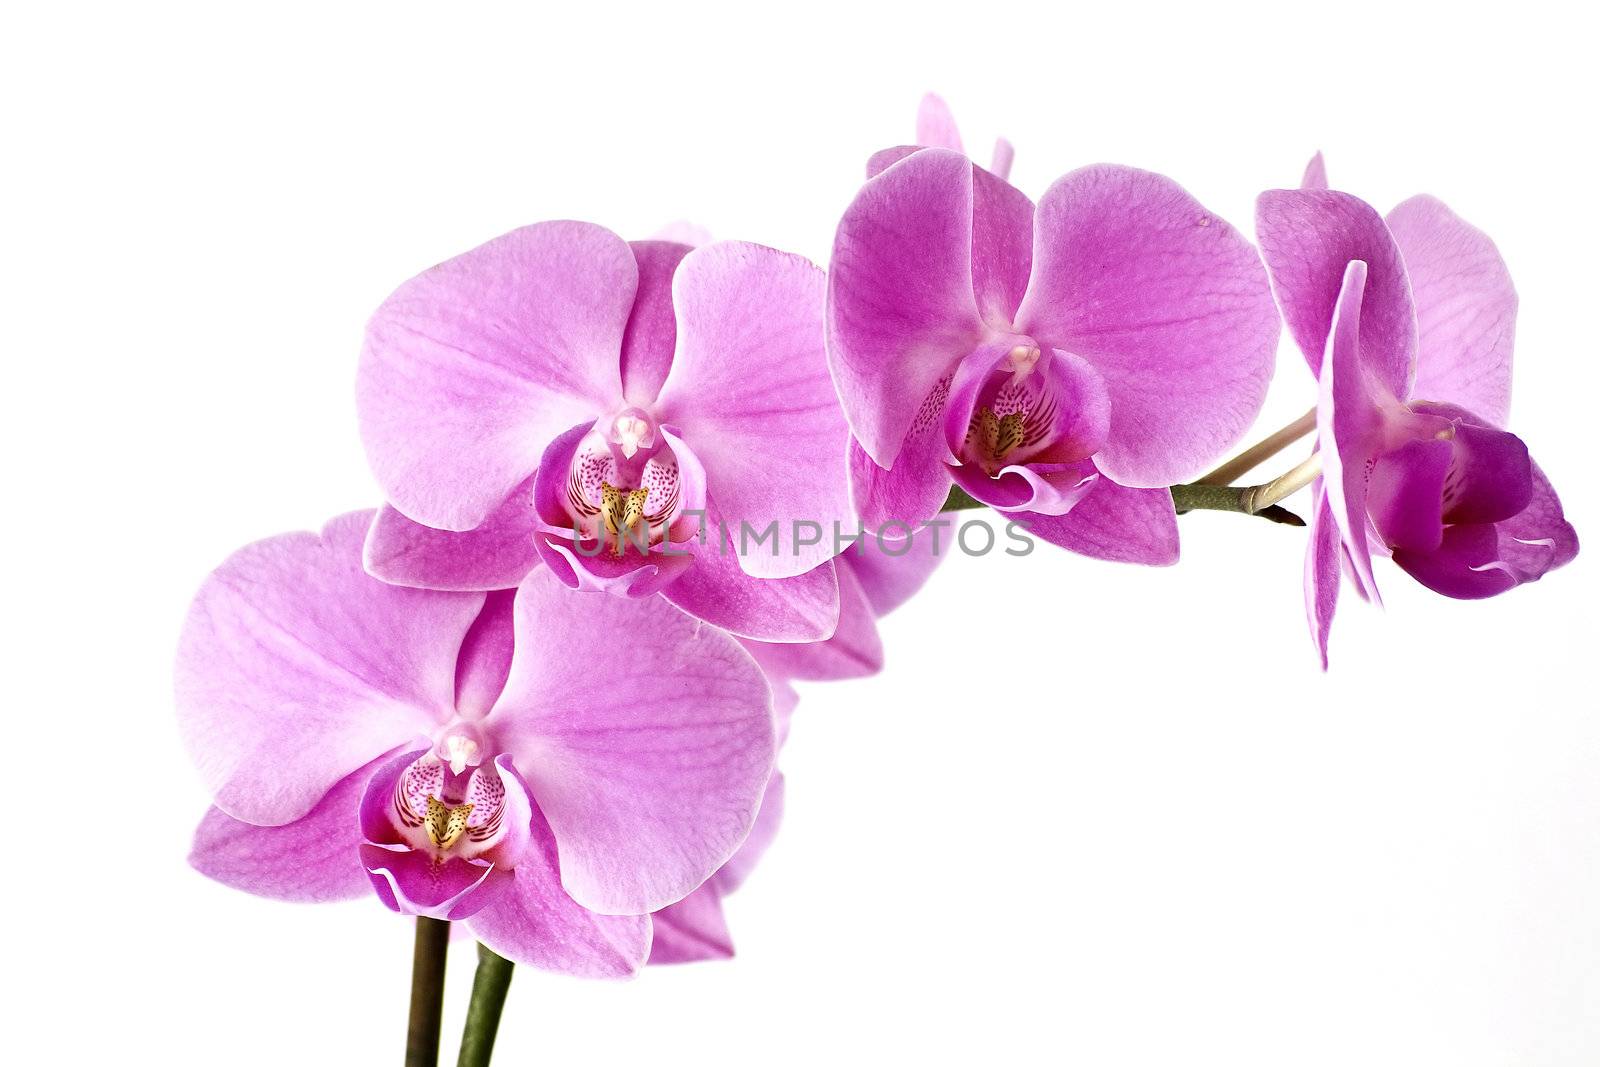 Orchid isolated on a white background